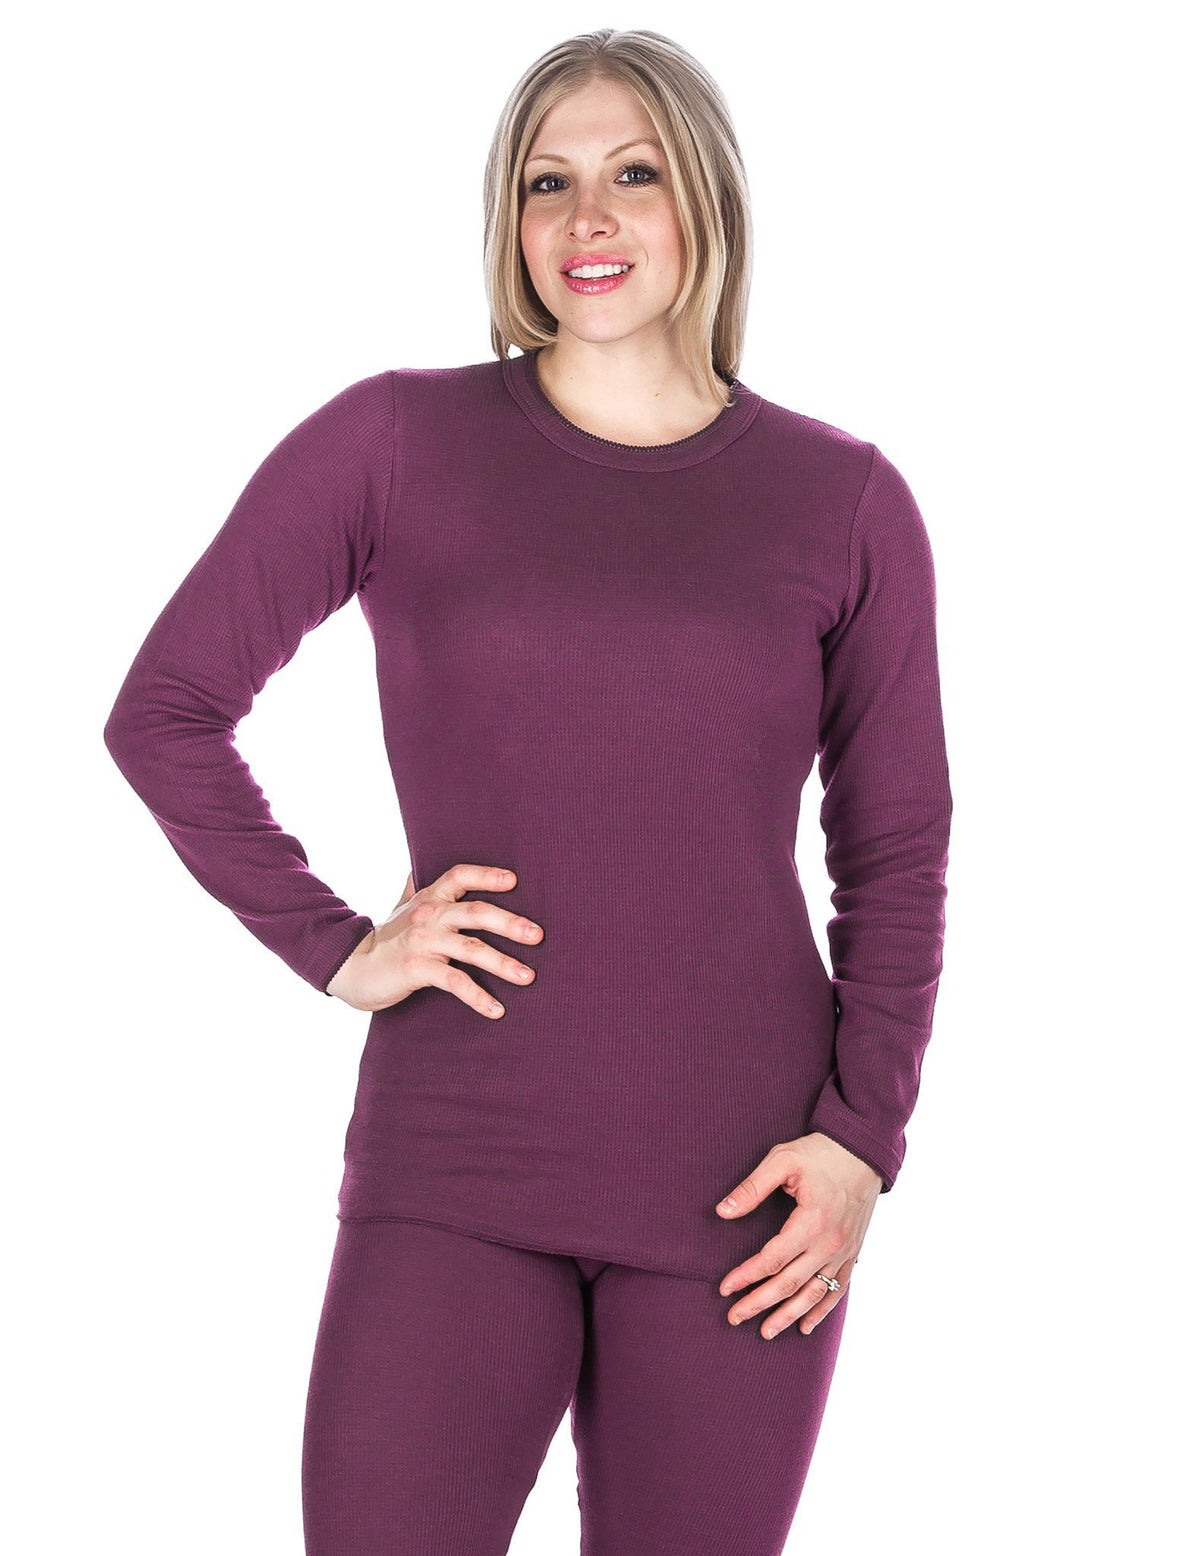 Women's Classic Waffle Knit Thermal Crew Top - Purple